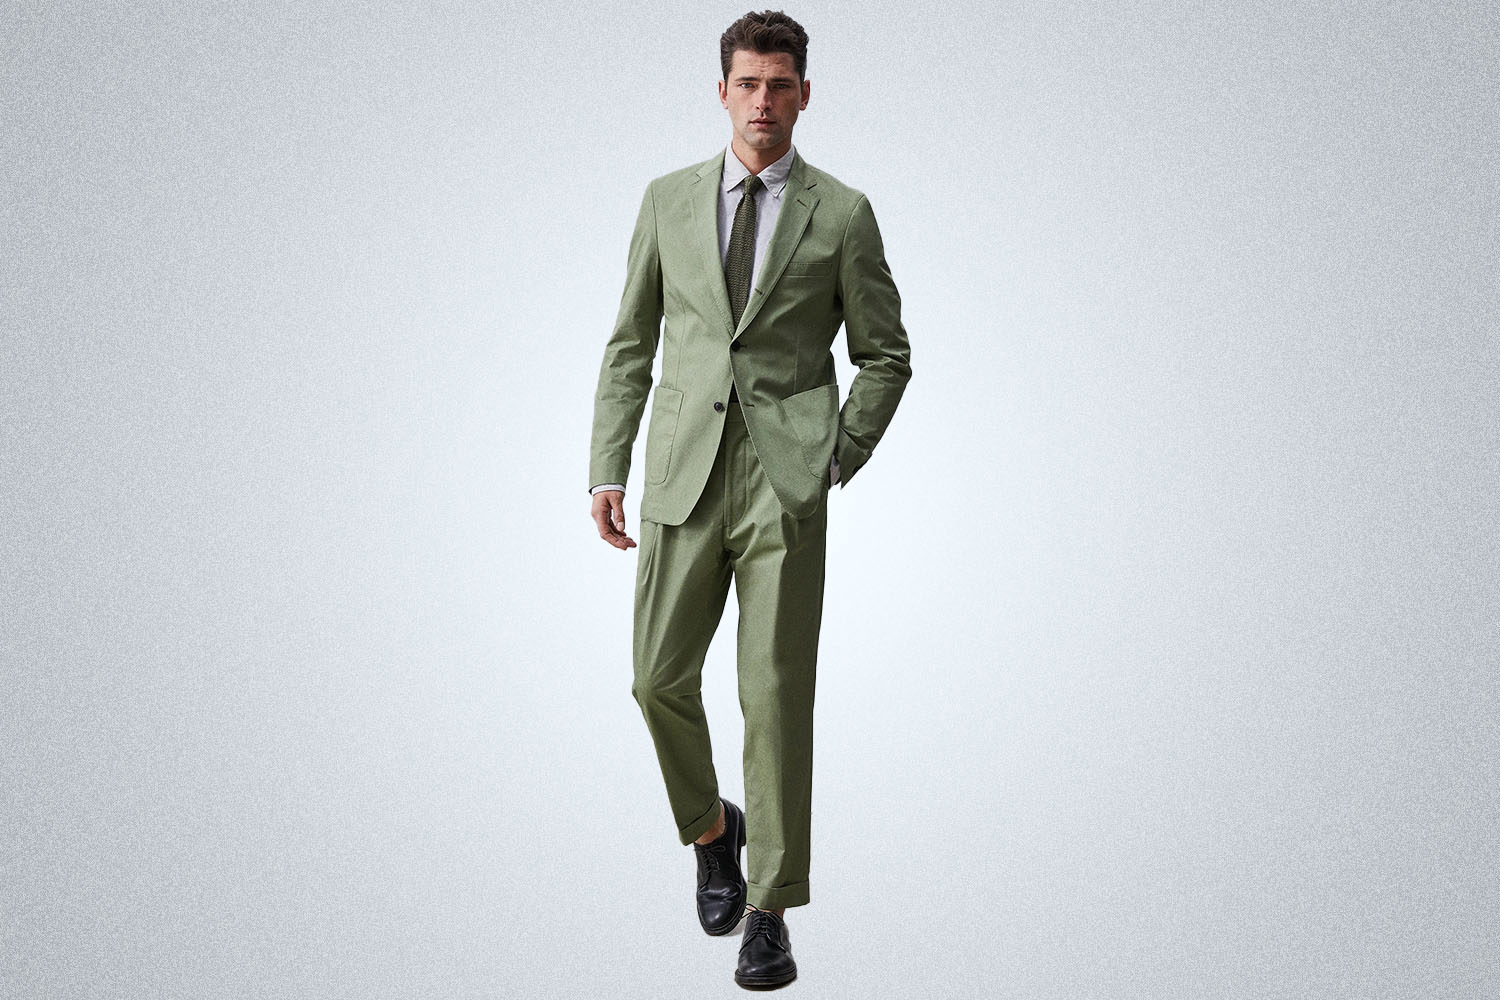 A model in a green Todd Snyder suit on a grey background